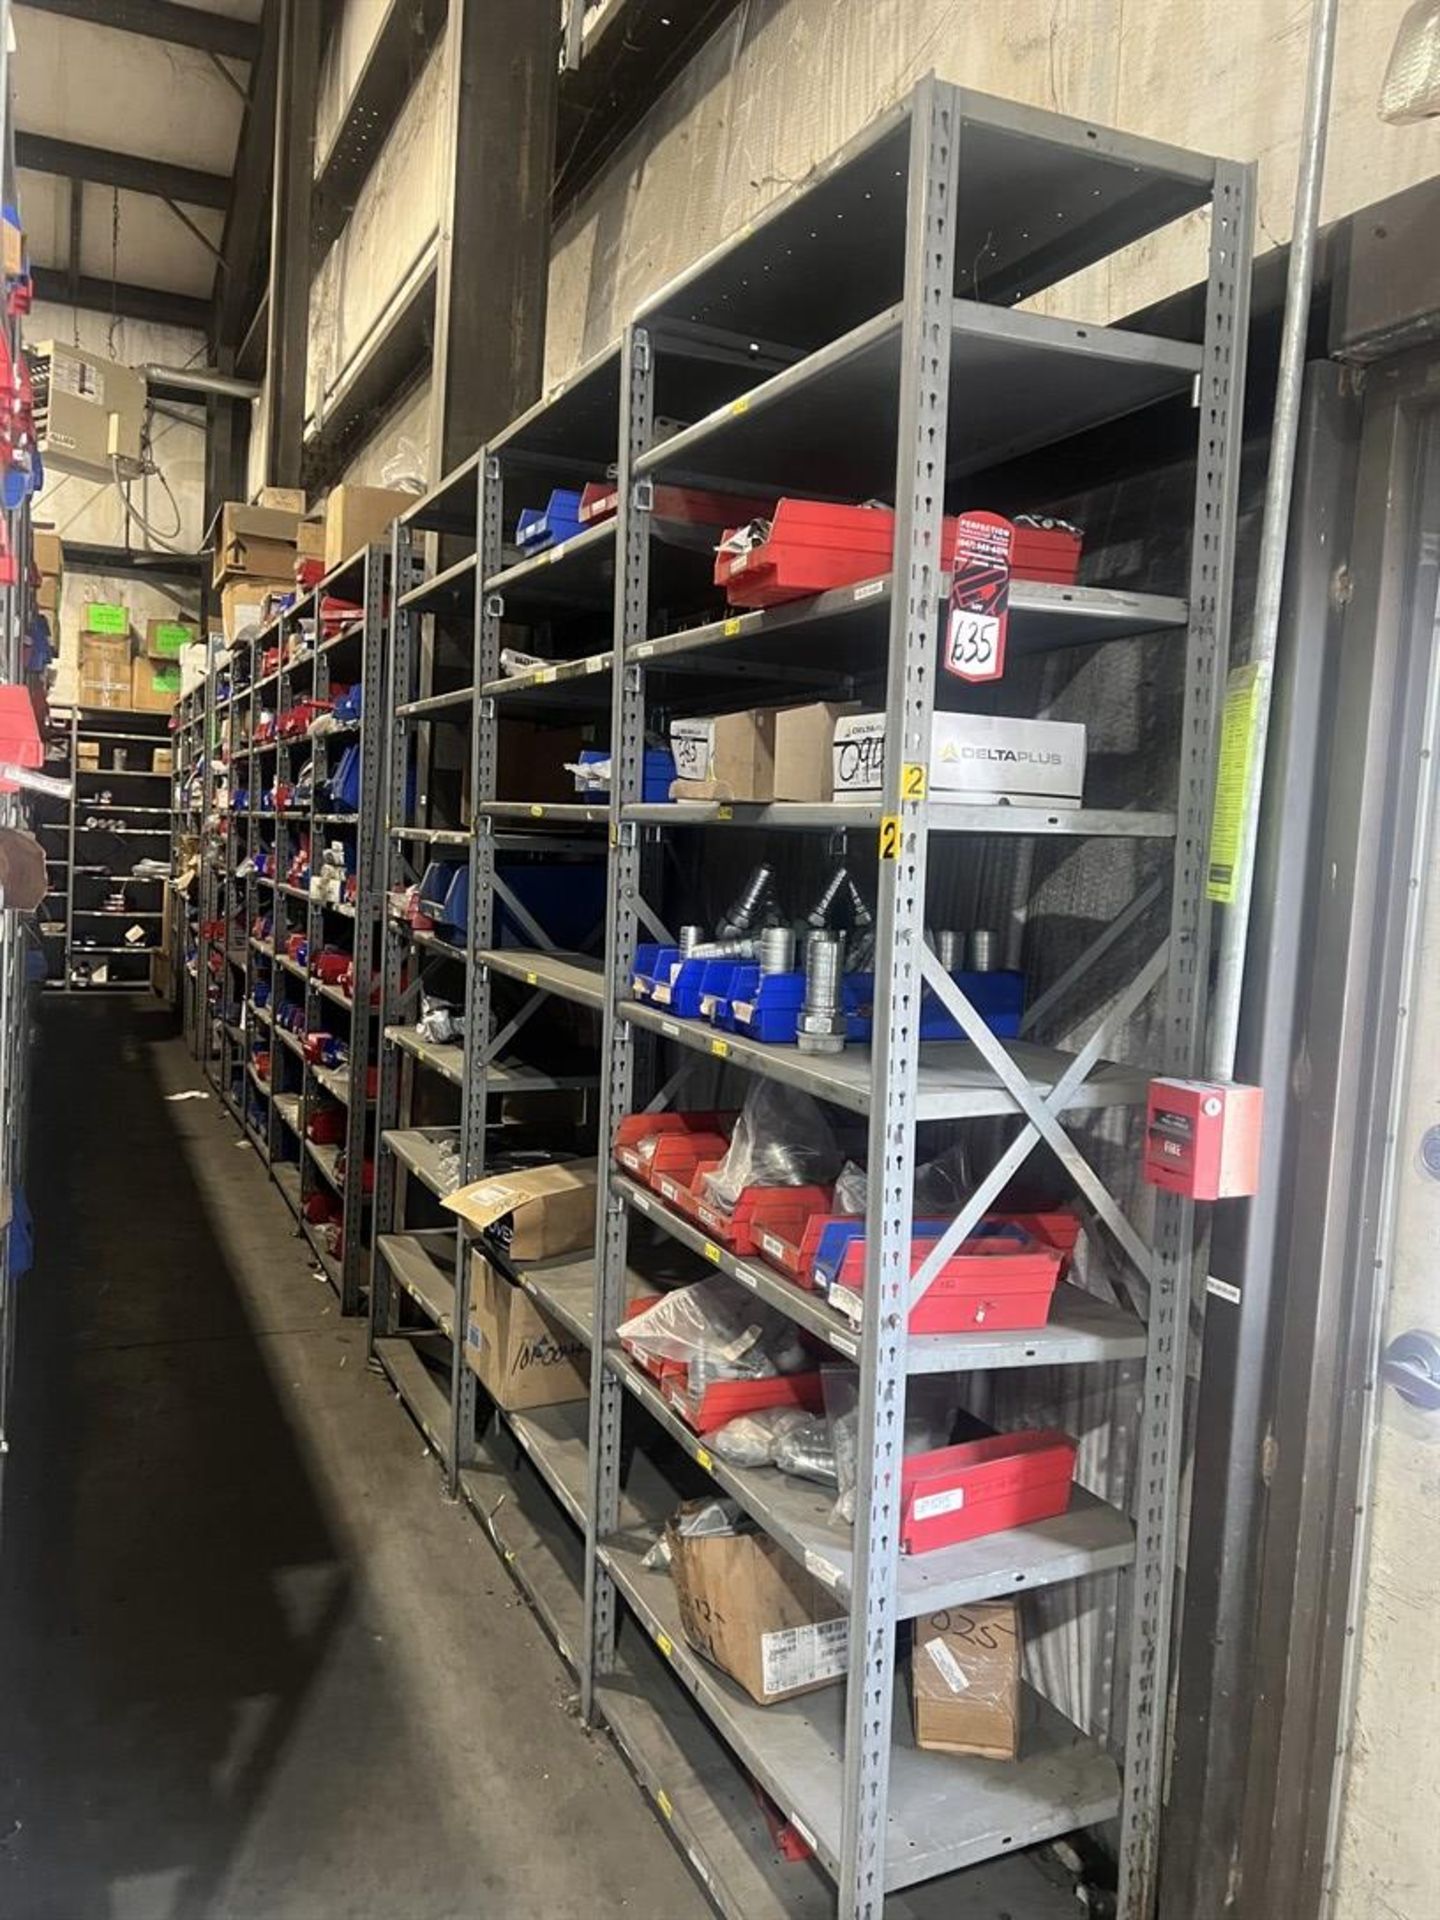 Lot Comprising (11) Shop Shelving Units w/ Contents Including Assorted PPE, Hardware, Chain